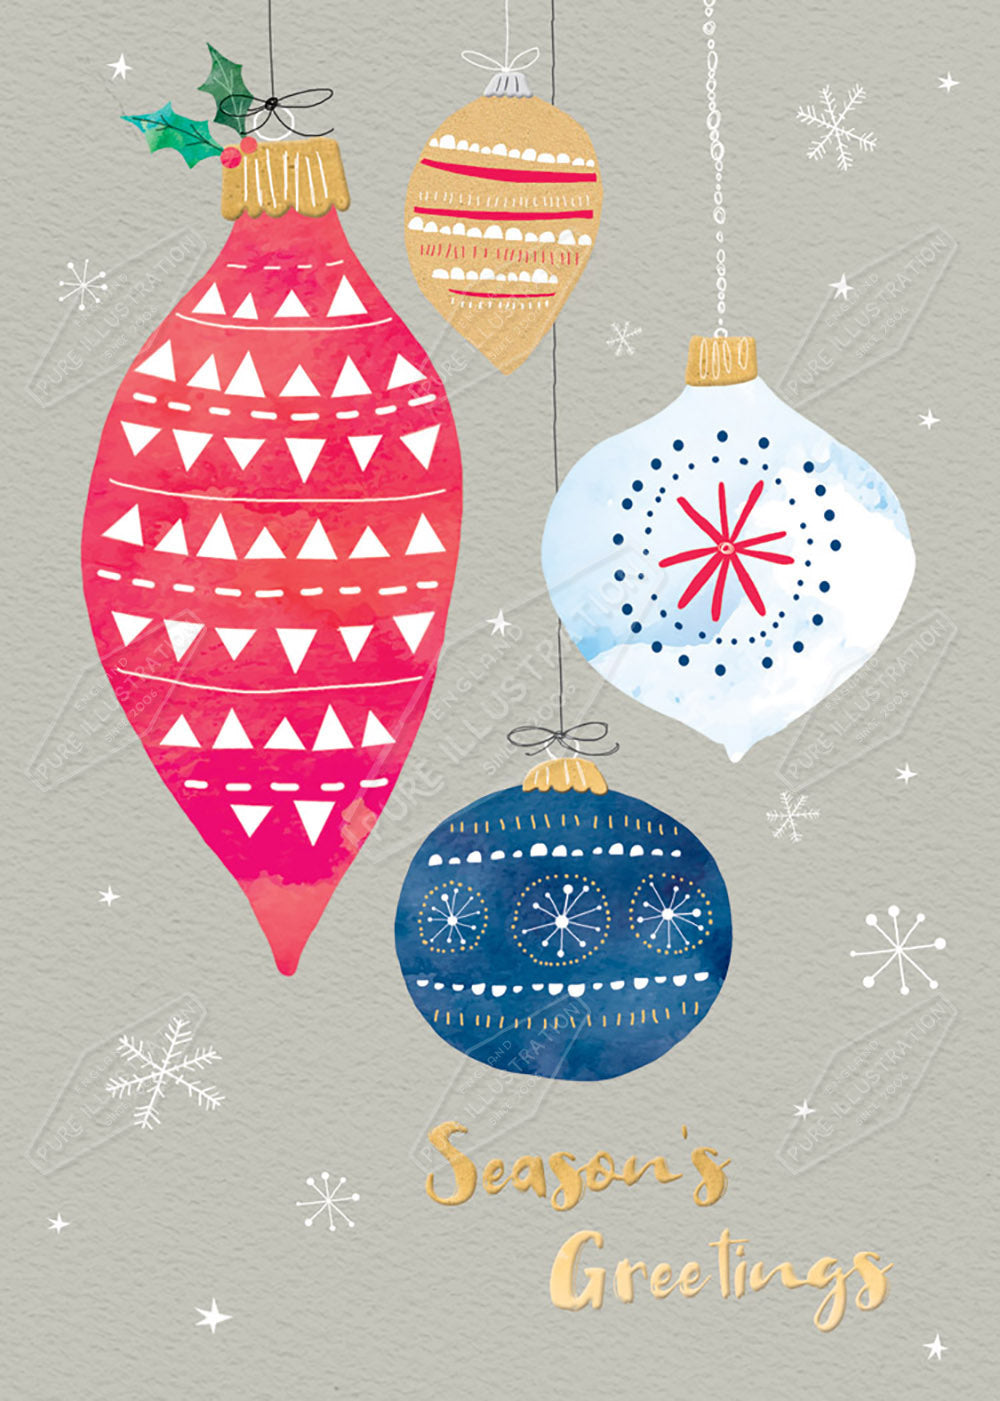 Christmas Decorations Greeting Card Design Illustration by Cory Reid for Pure Art Licensing Agency & Surface Design Studio